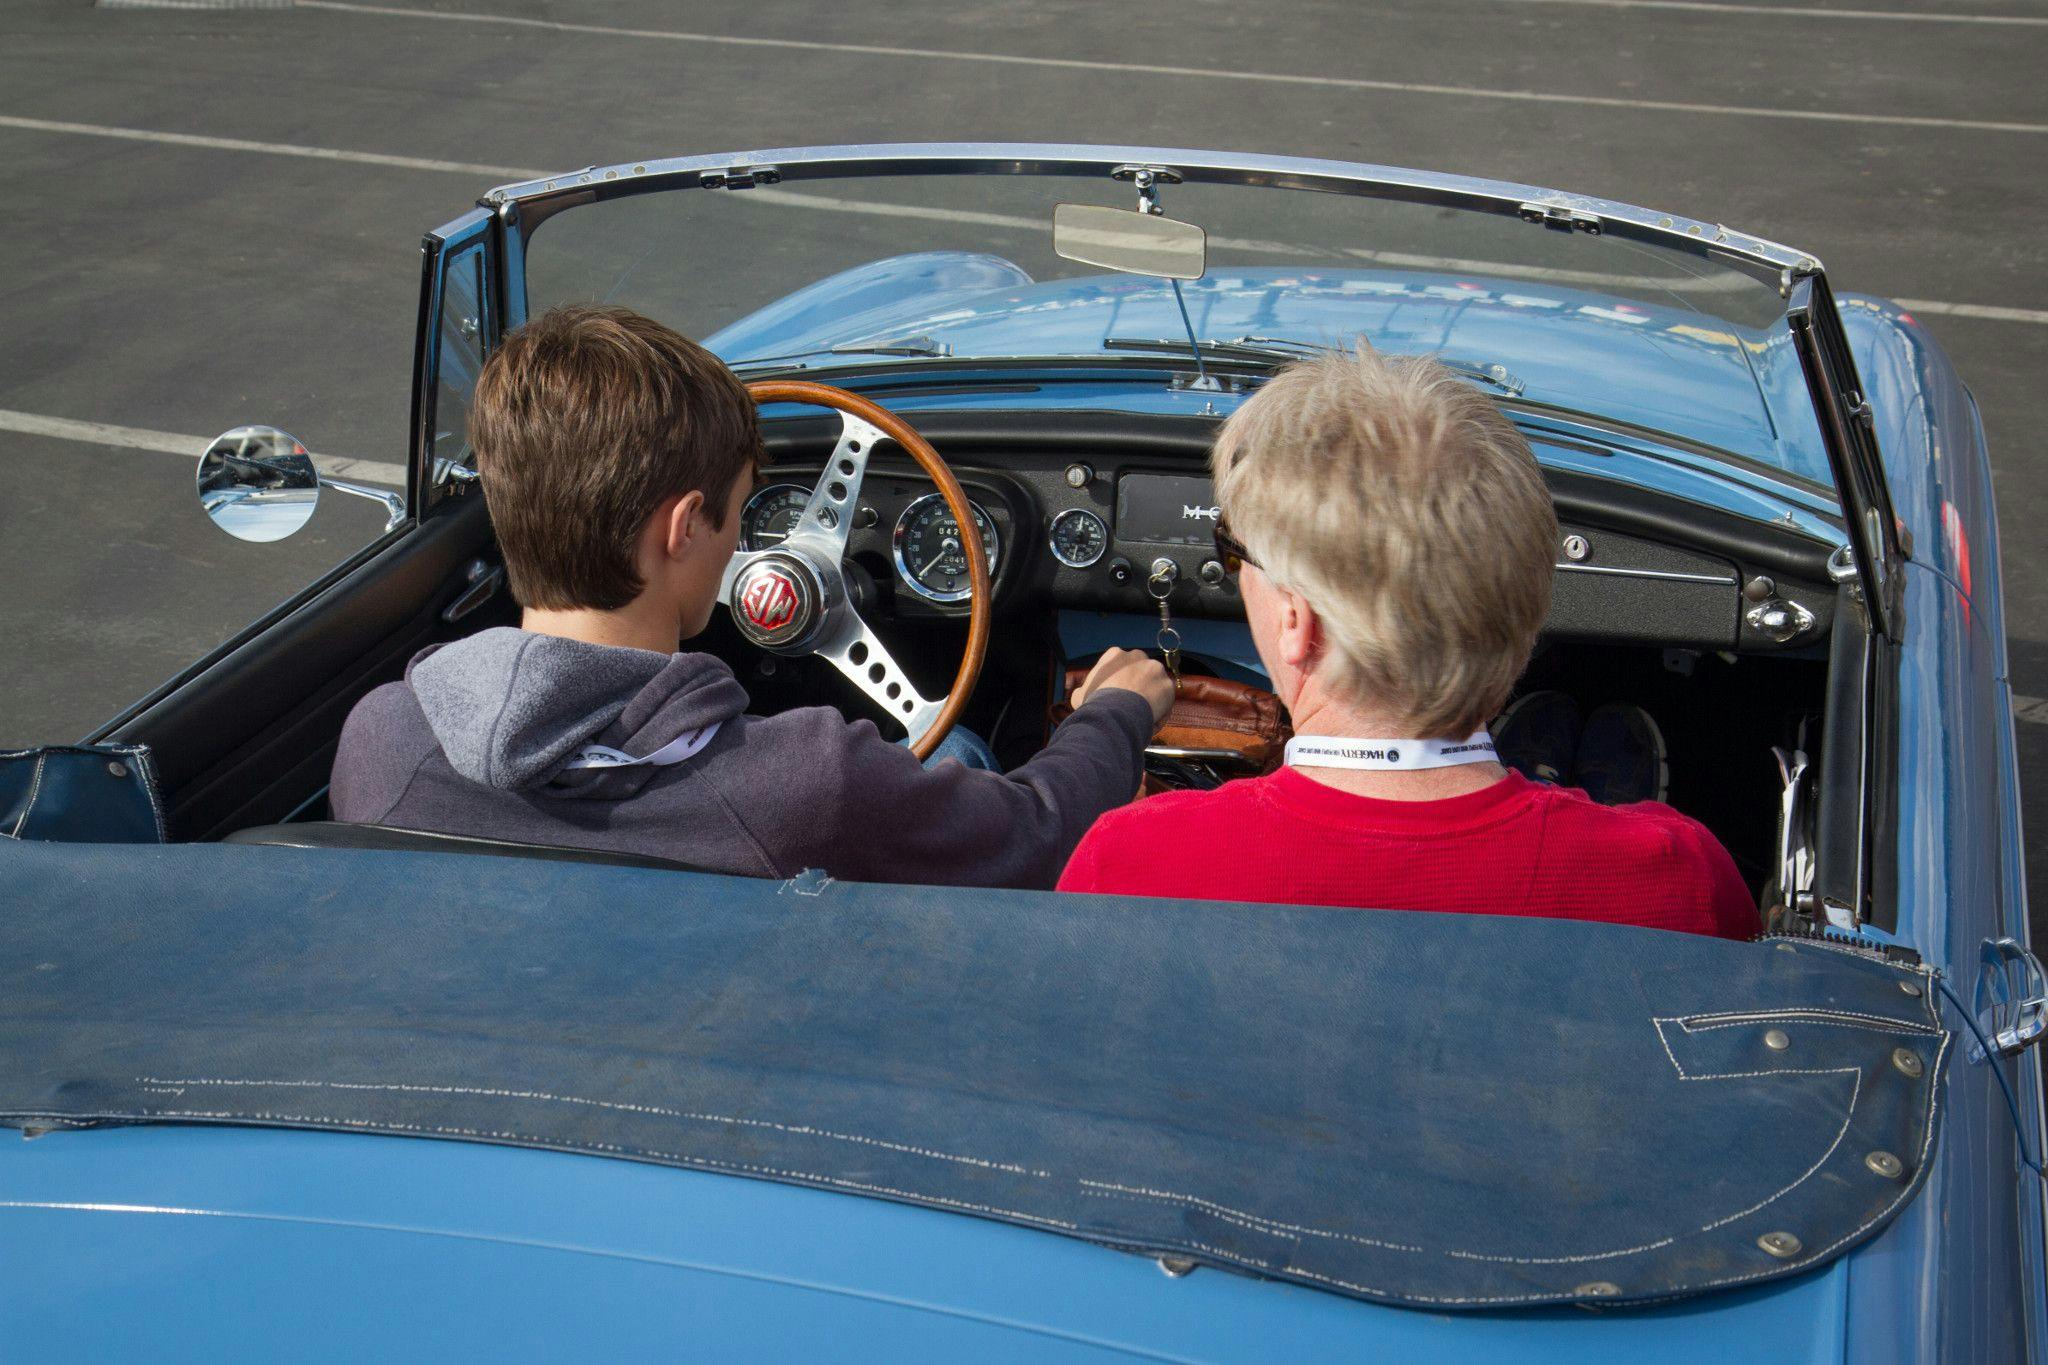 What we'd tell our younger, car-crazy selves - Hagerty Media